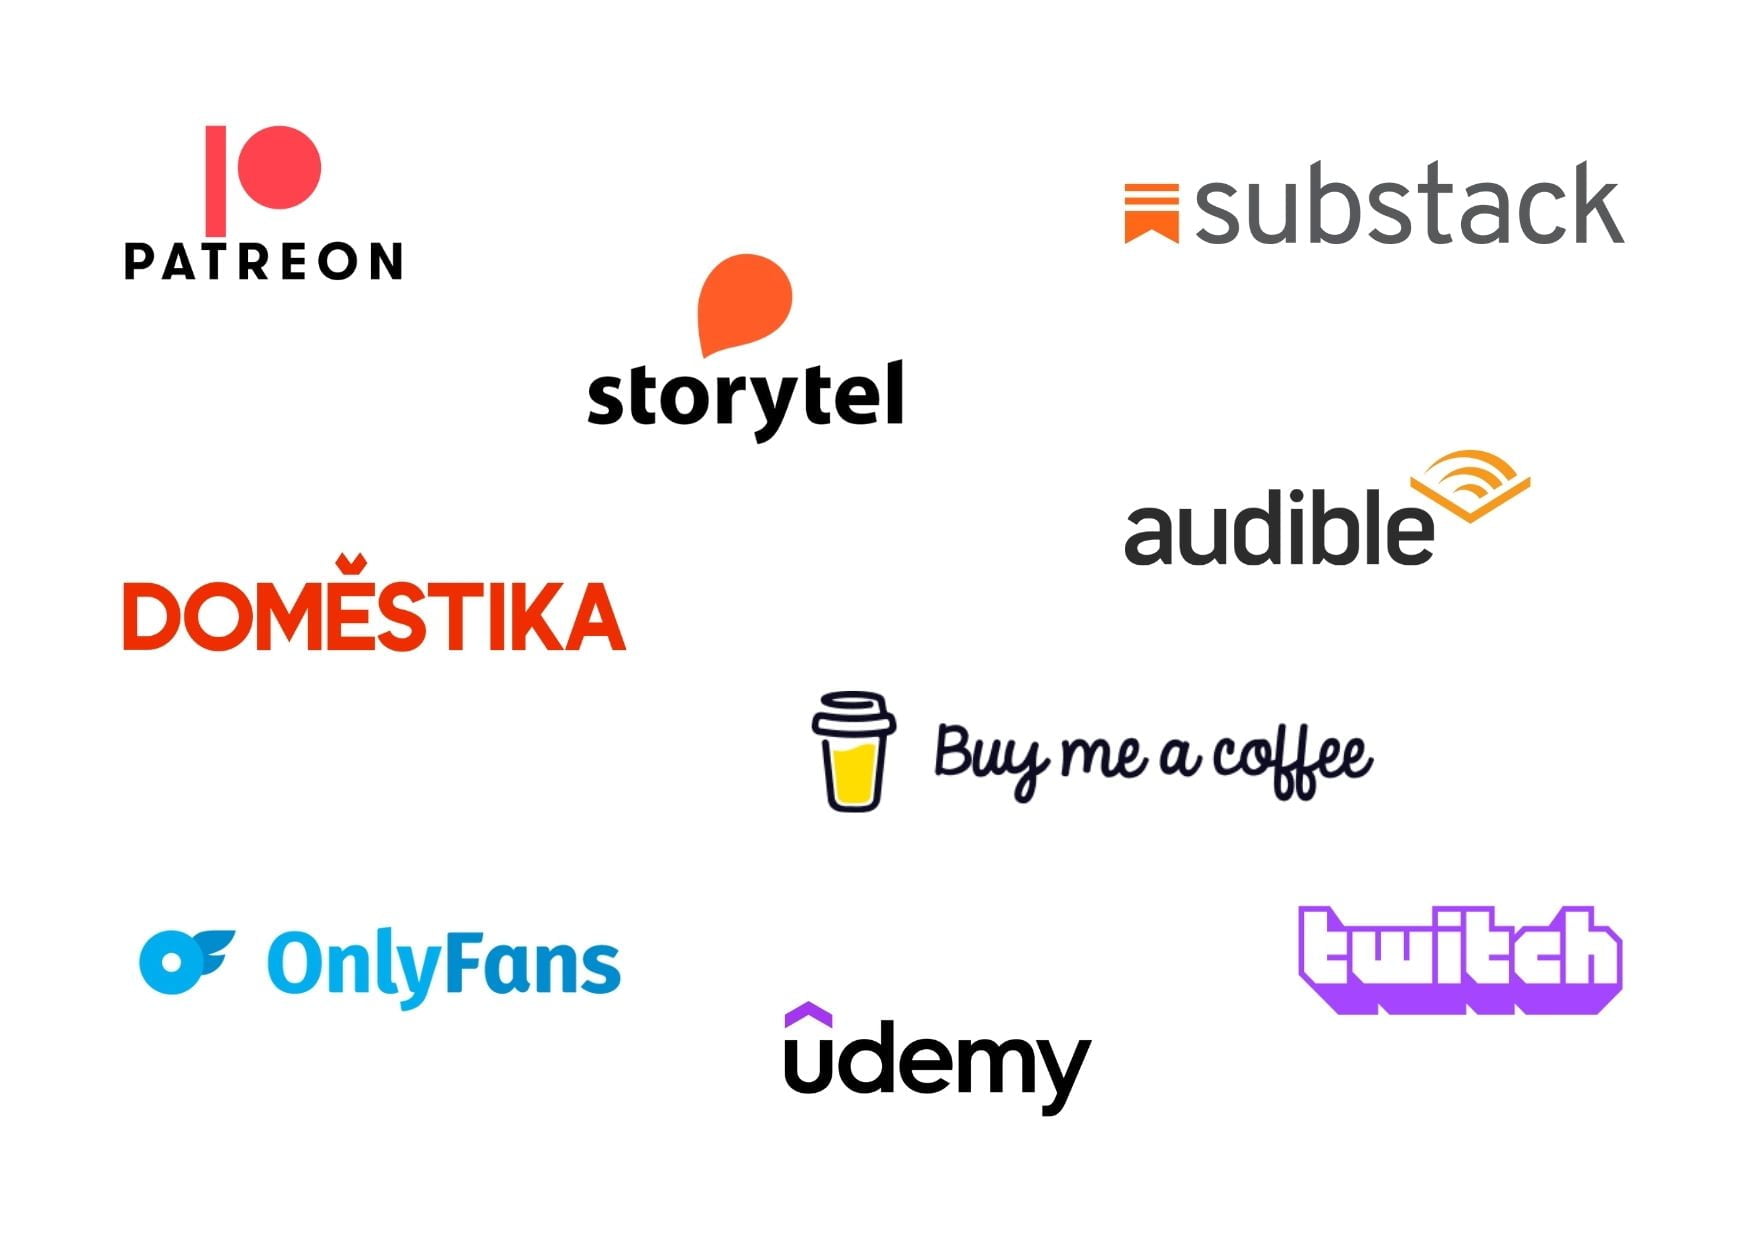 I loghi delle piattaforme della creator economy: Patreon, Domestika, OnlyFans, Storytel, Buy Me a Coffee, Udemy, Substack, Audible, Twitch.